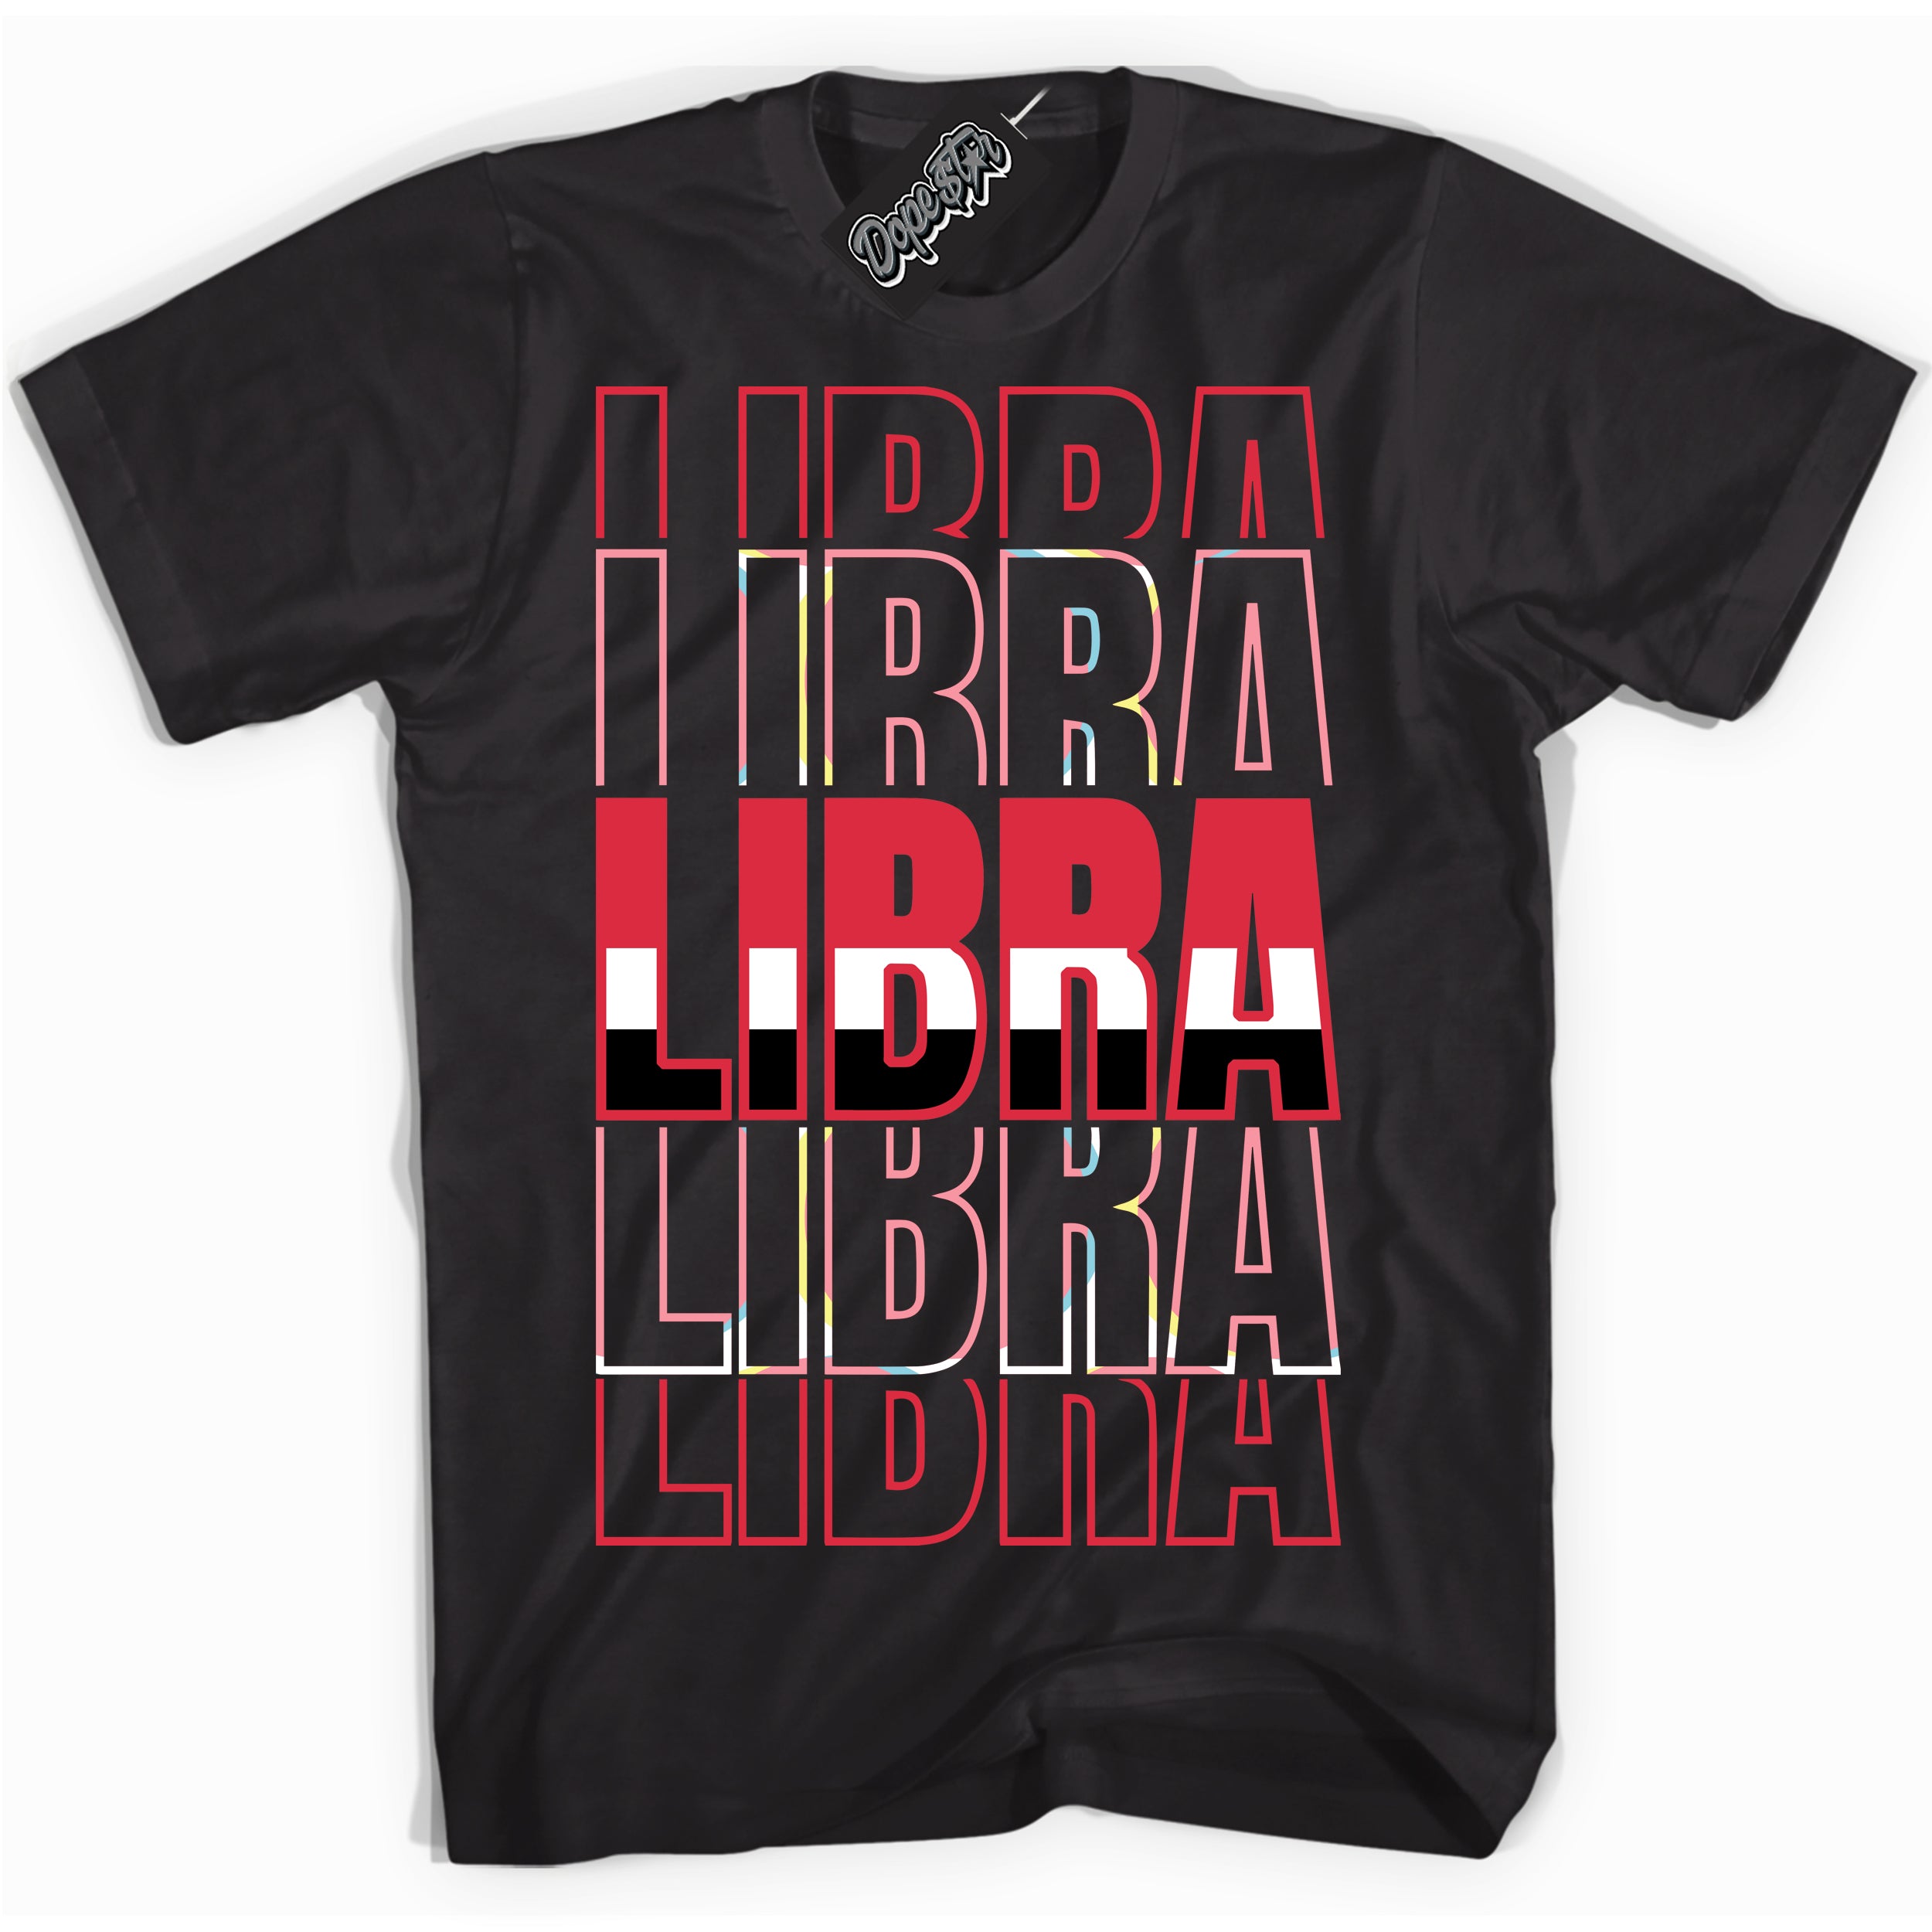 Cool Black graphic tee with “ Libra ” design, that perfectly matches Spider-Verse 1s sneakers 